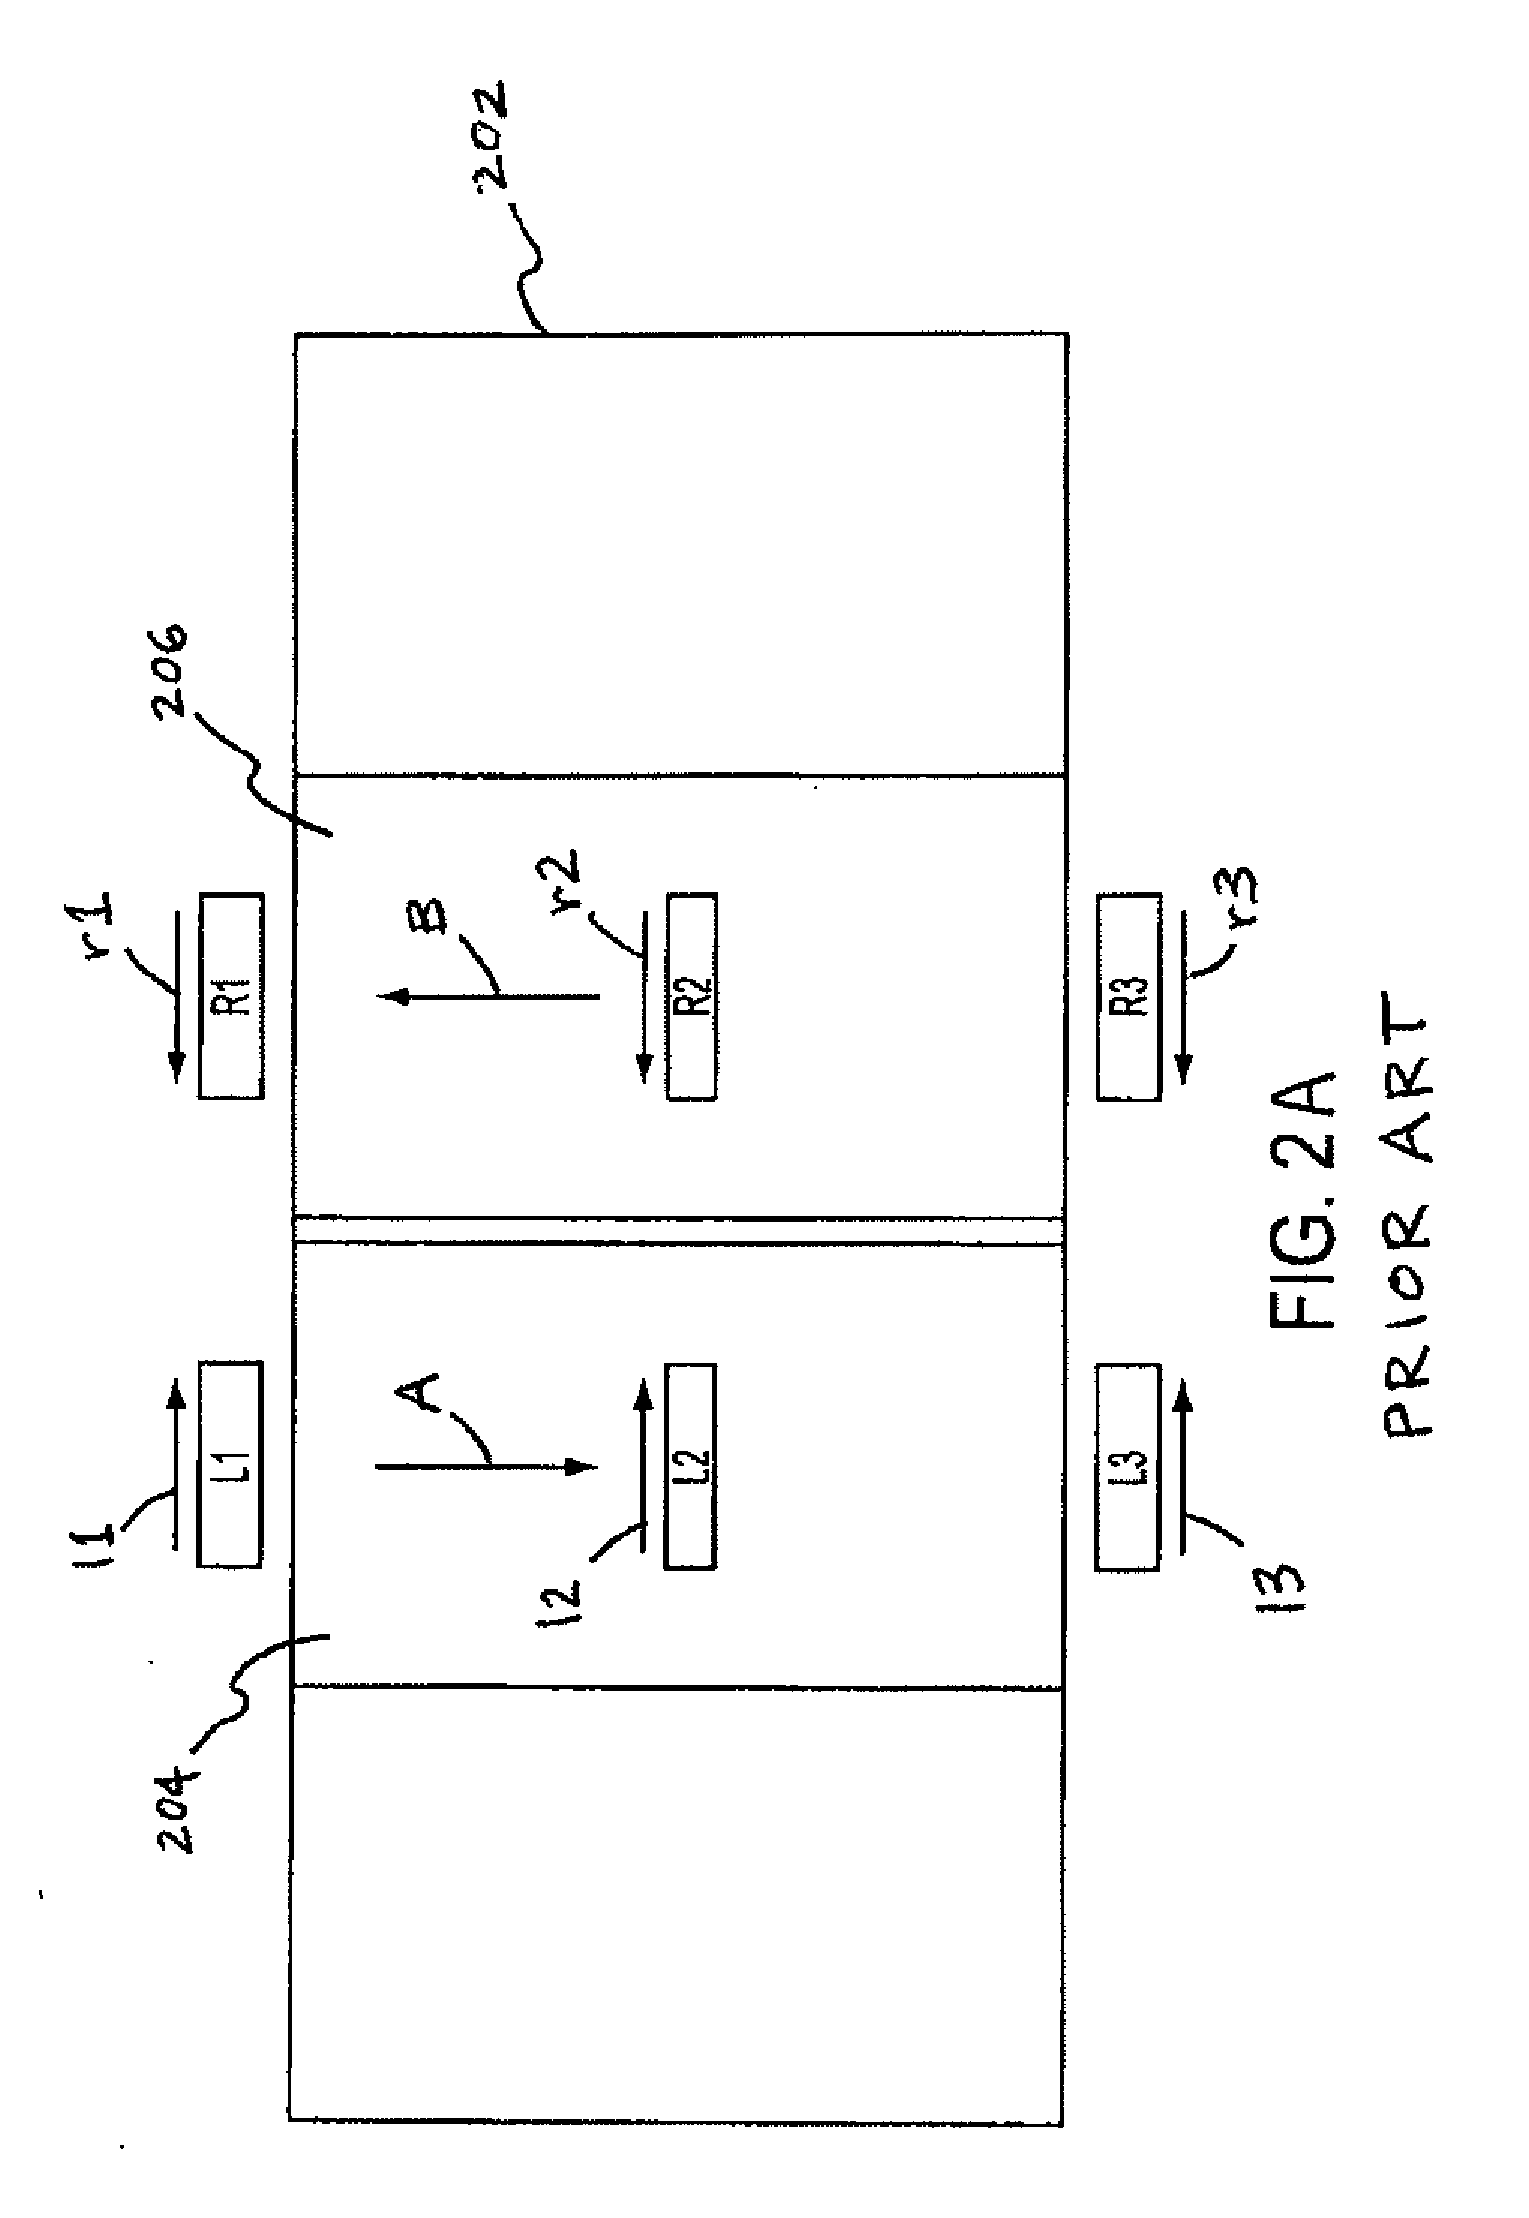 Magnetoelastic torque sensor with ambient field rejection